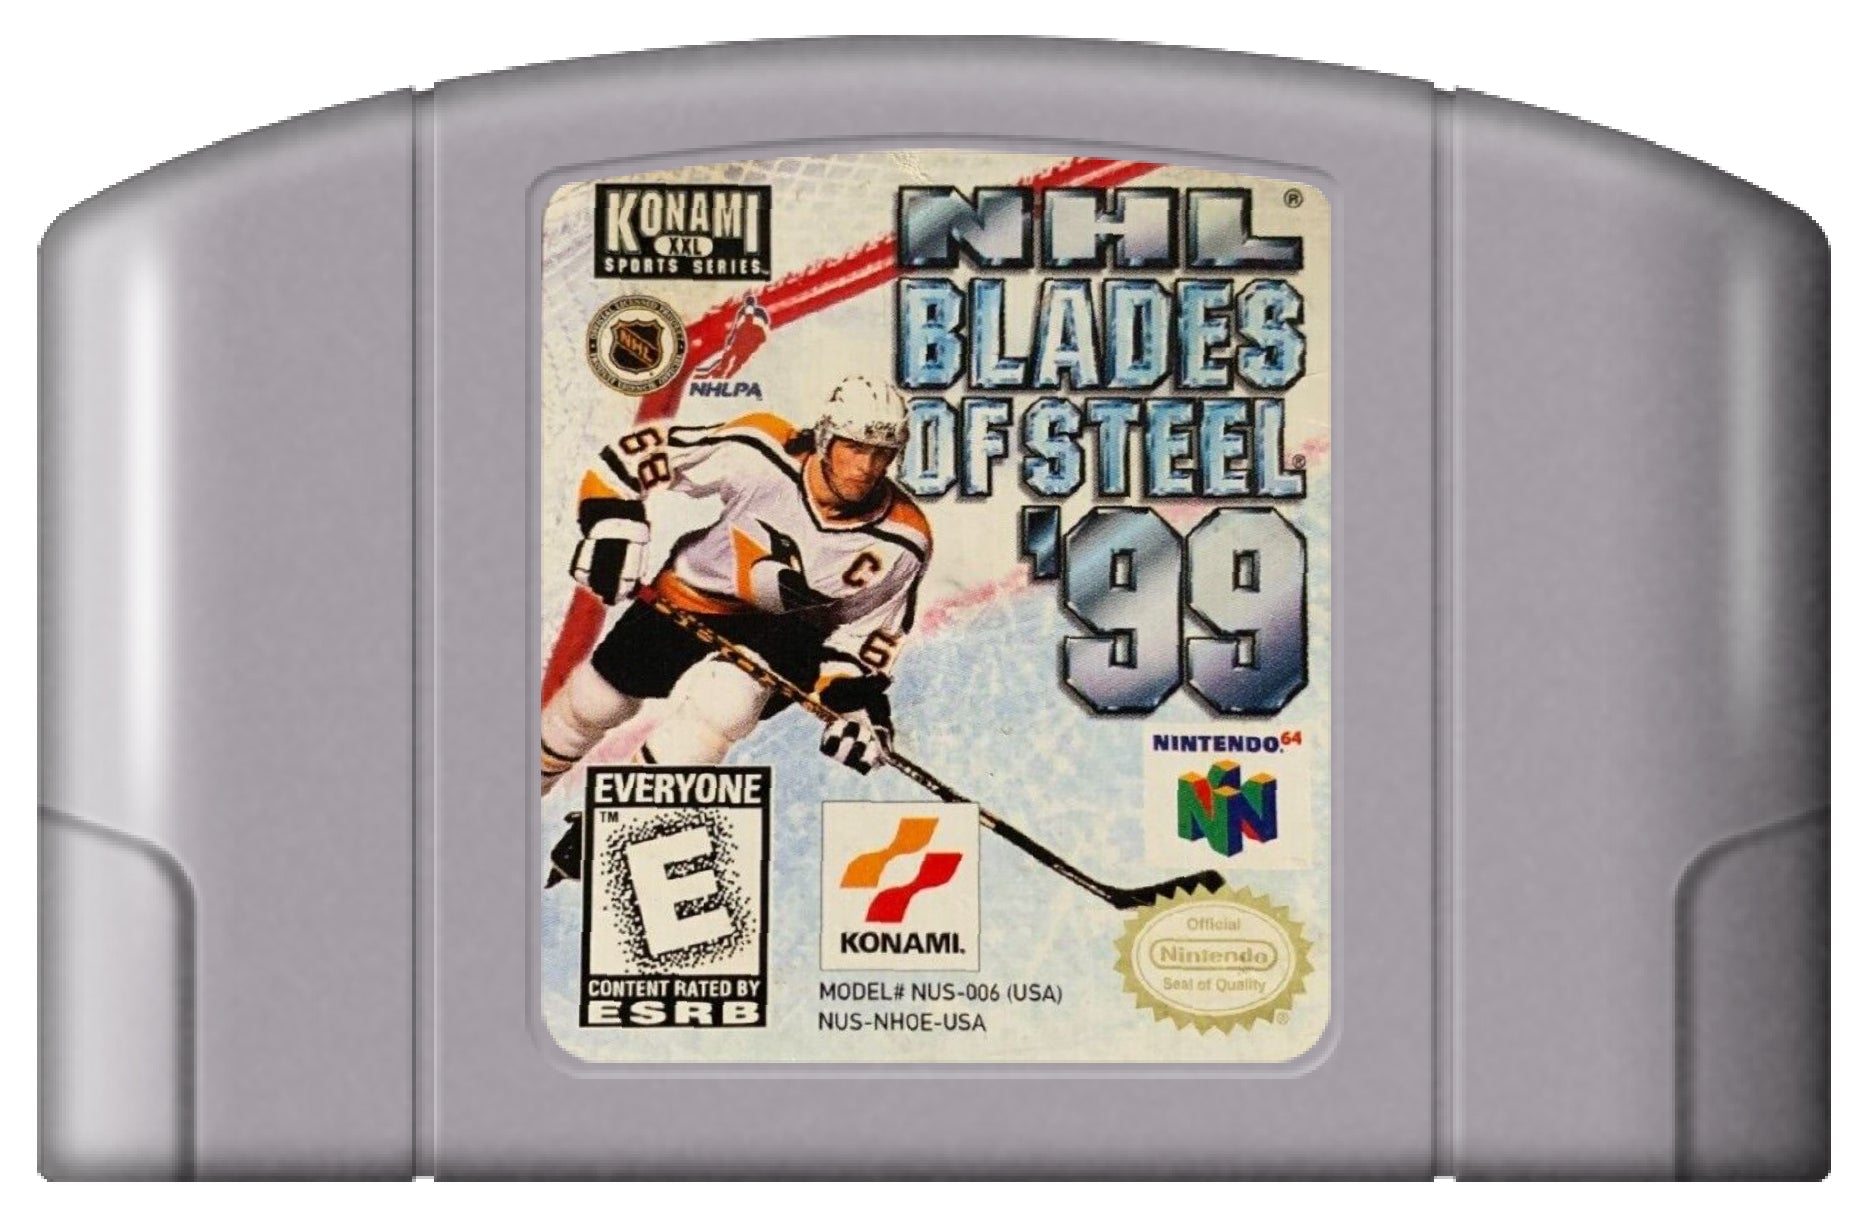 NHL Blades of Steel 99 Cover Art and Product Photo